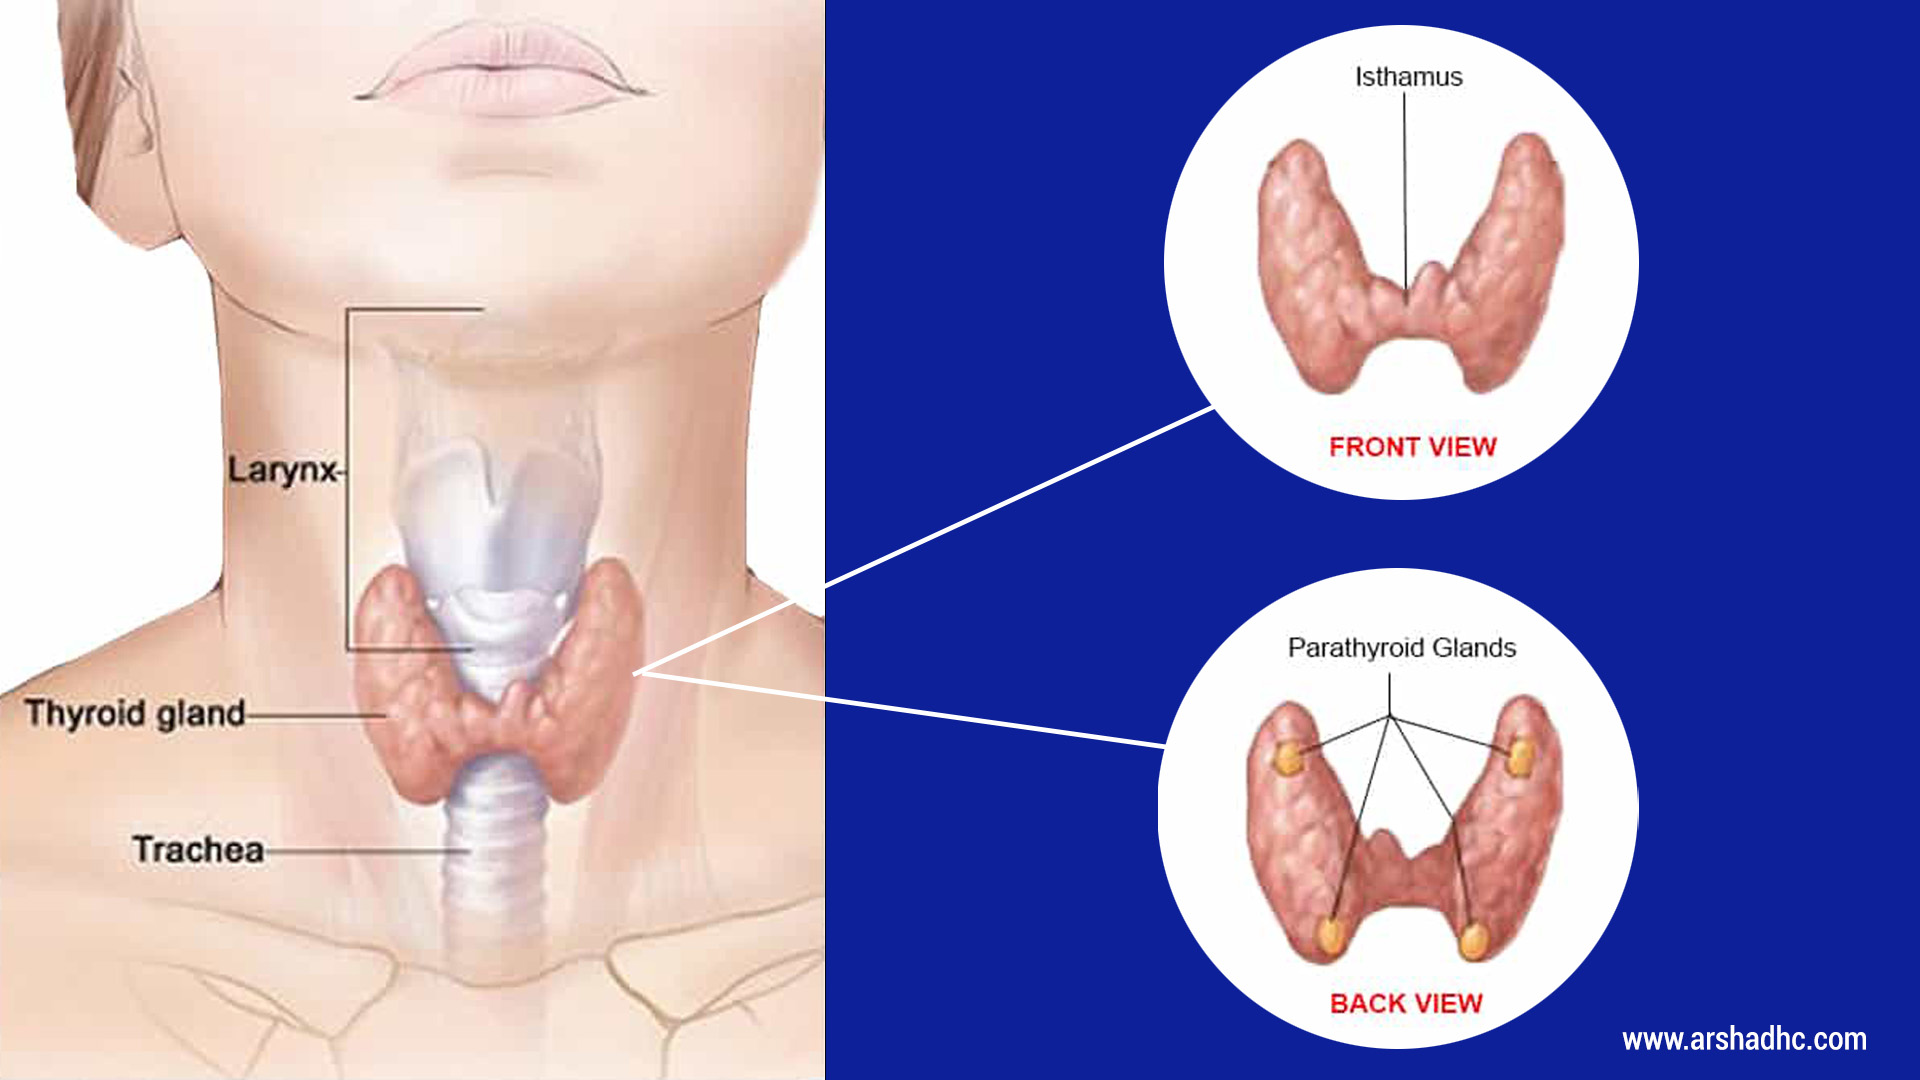 What is Thyroids